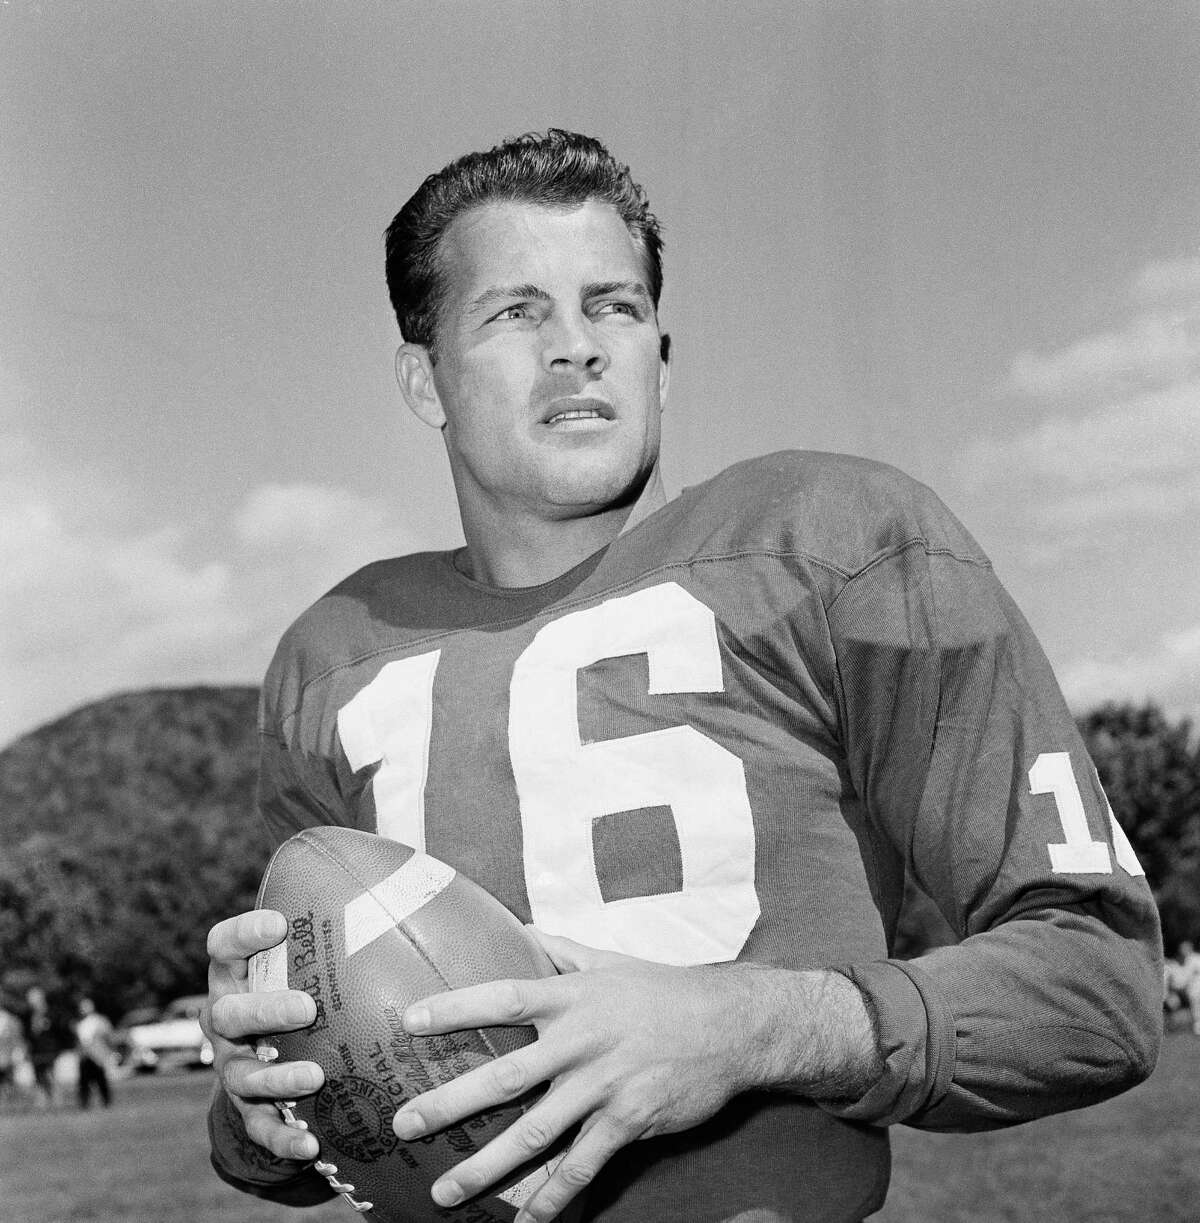 FILE - In this Sept. 9, 1958 file photo, New York Giants halfback Frank Gifford participates in a workout in New York. In a statement released by NBC News on Sunday, Aug. 9, 2015, his family said Gifford died suddenly at his Connecticut home of natural causes that morning. (AP Photo/John Rooney, File) ORG XMIT: NY120